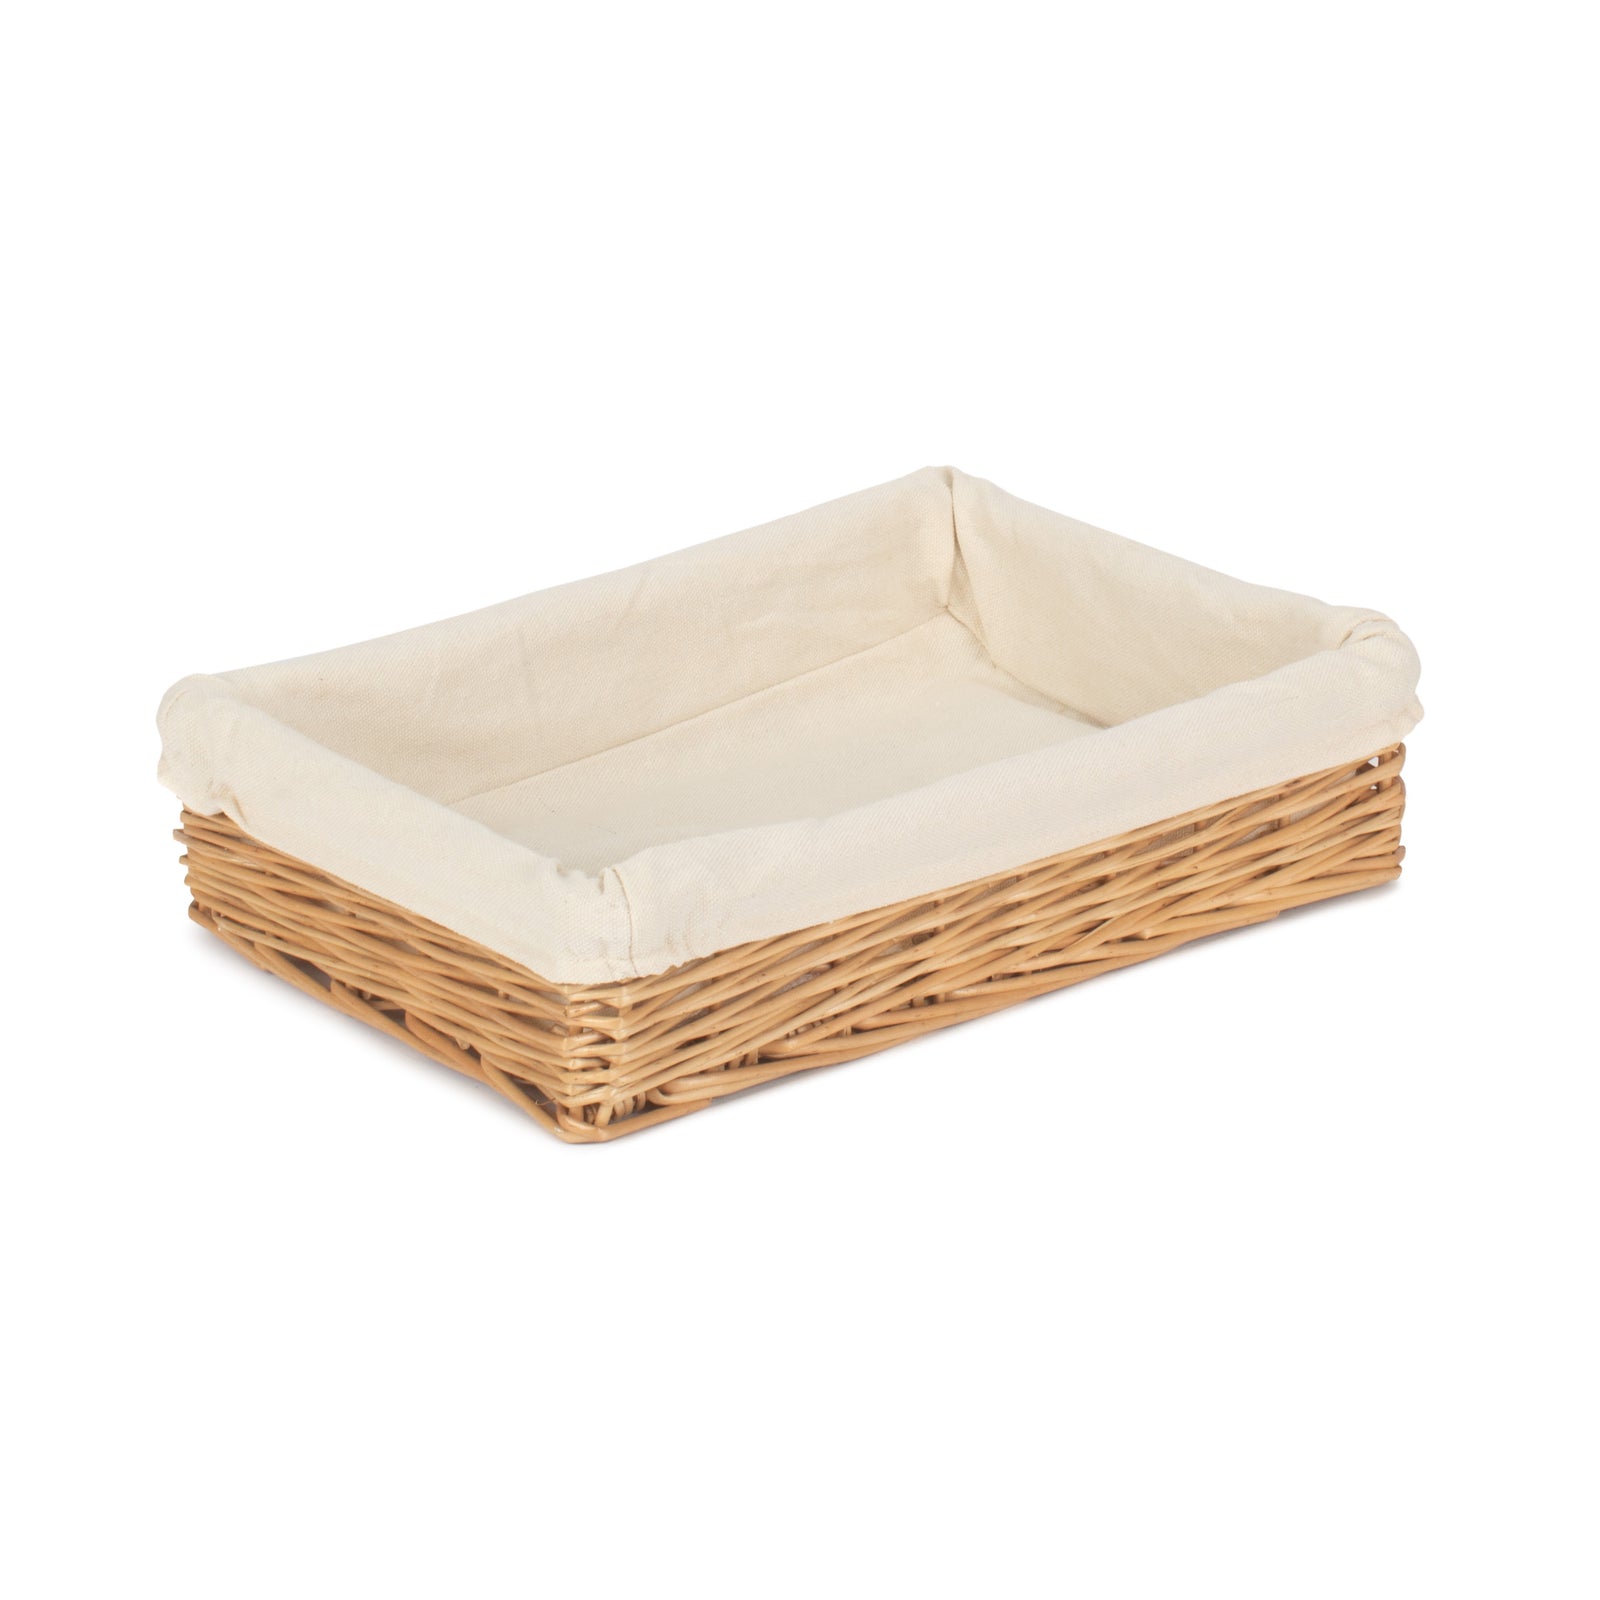 Red Hamper Wicker Cotton Lined Straight-sided Rectangular Tray